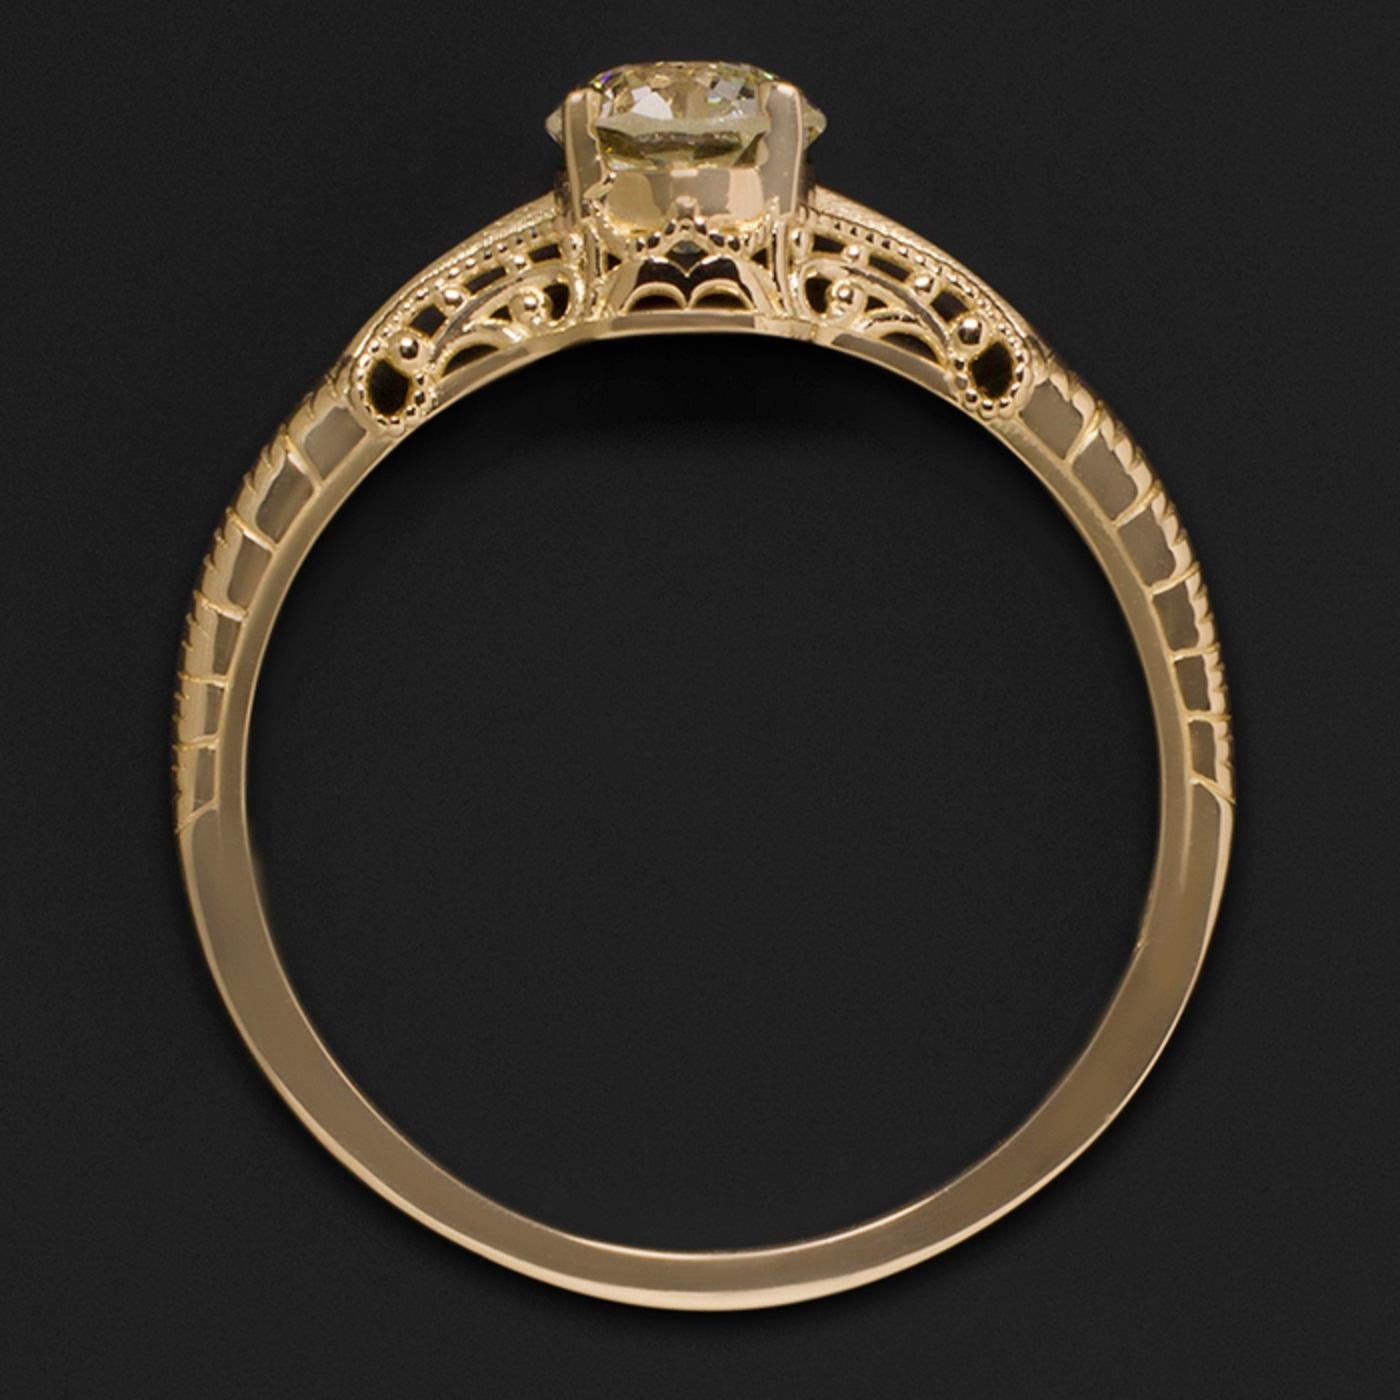 Ring with a 0.60 ct antique European cut diamond set in a classic design 18k yellow gold mounting.
The diamond is certified by the GIA, graduated M in color and SI1 in clarity; it is a completely clean stone to the naked eye.